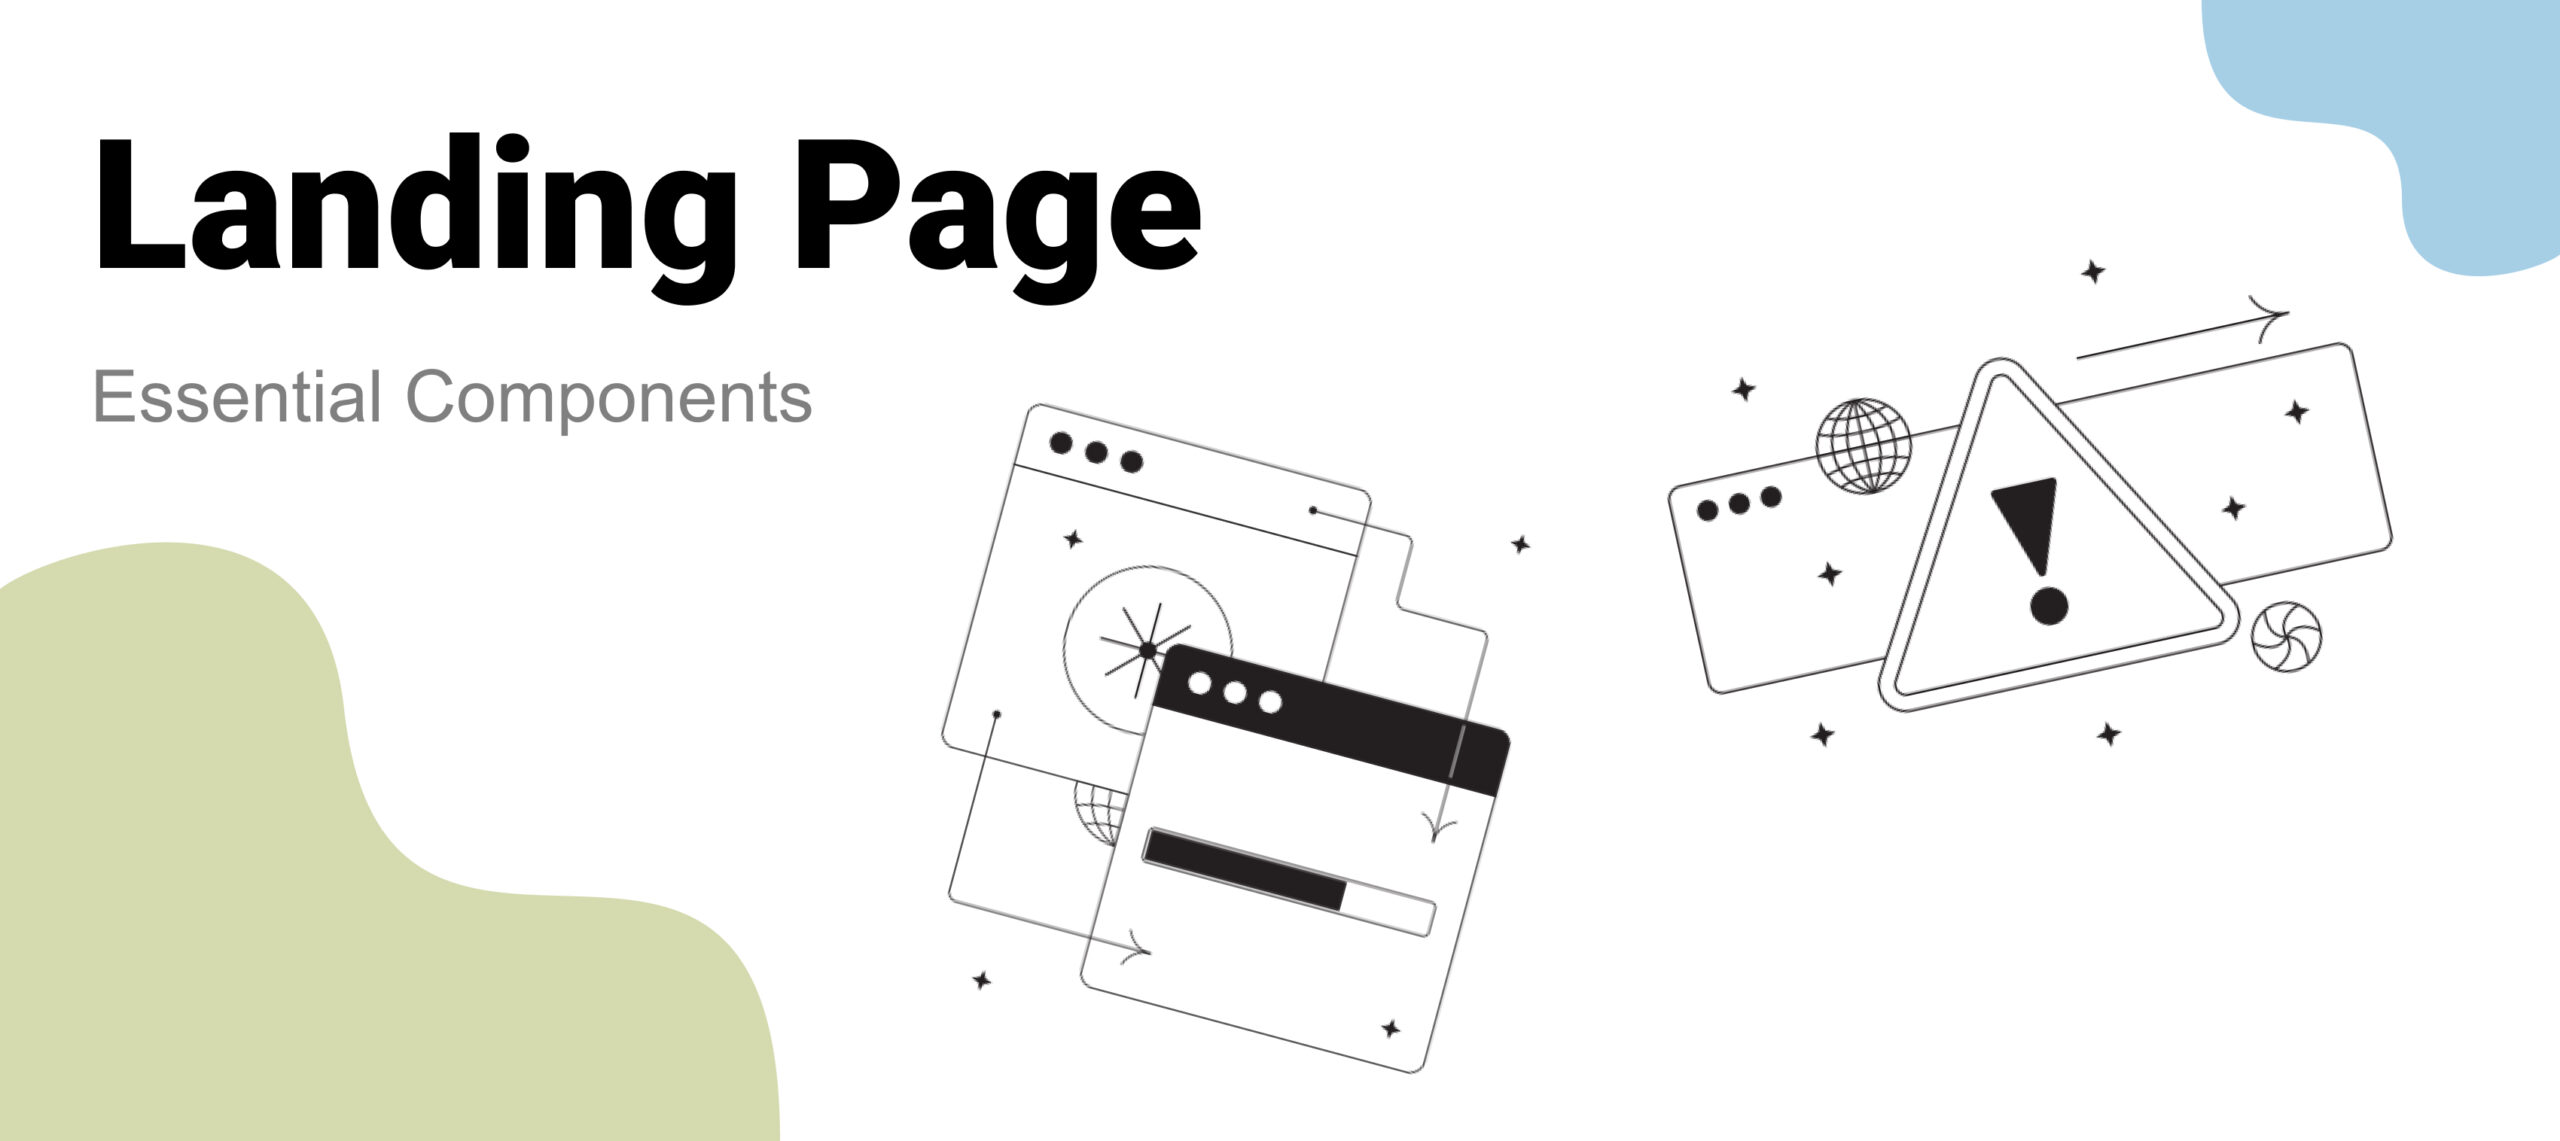  Essential Components of a Landing Page 